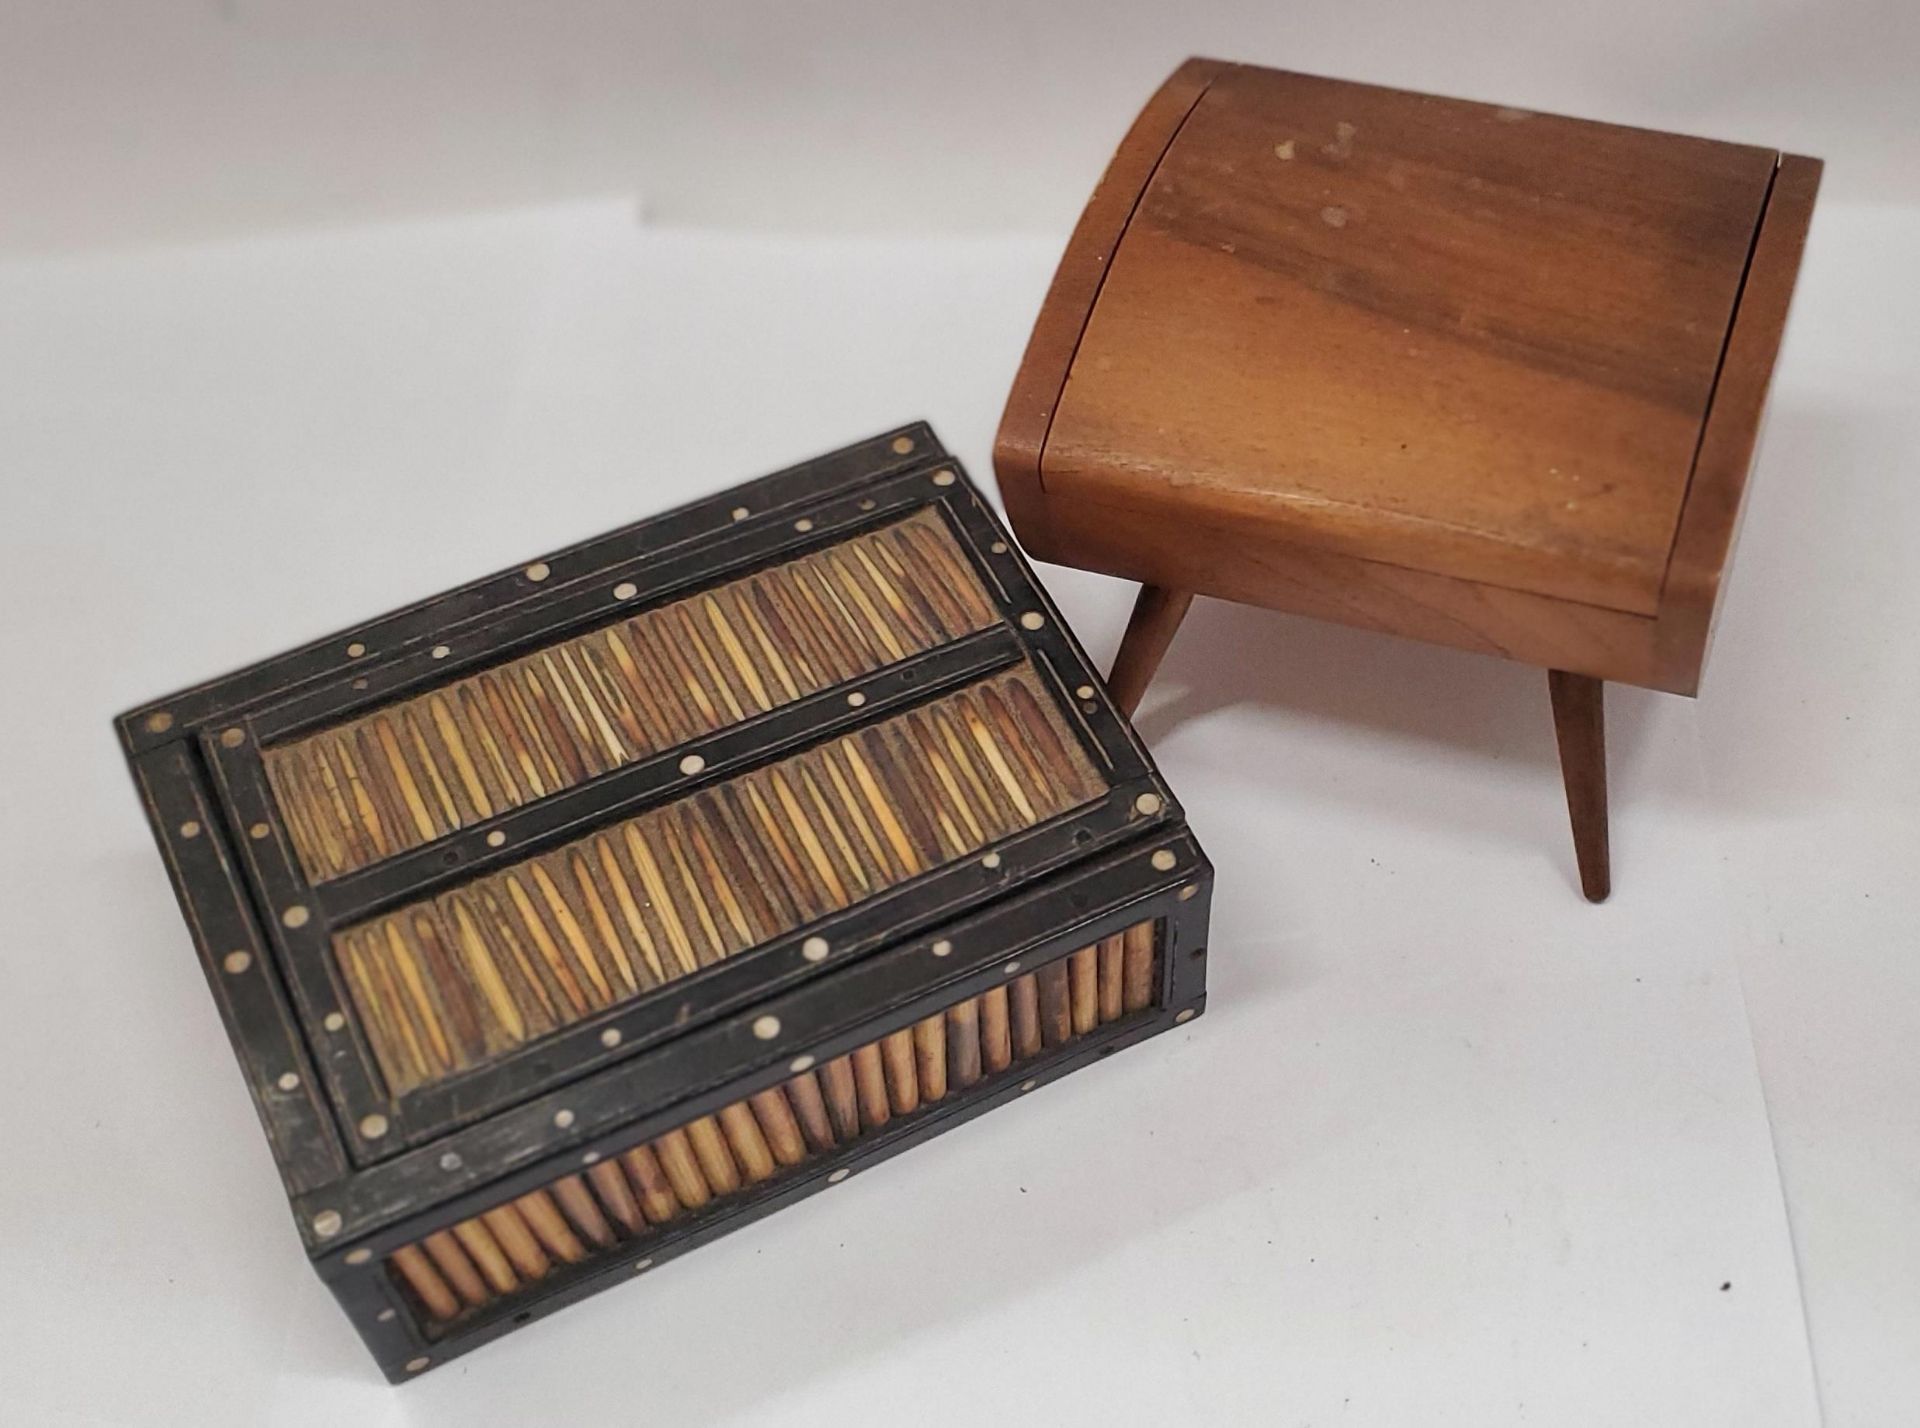 TWO VINTAGE BOXES, ONE WITH PORCUPINE QUILLS, THE OTHER ON LEGS